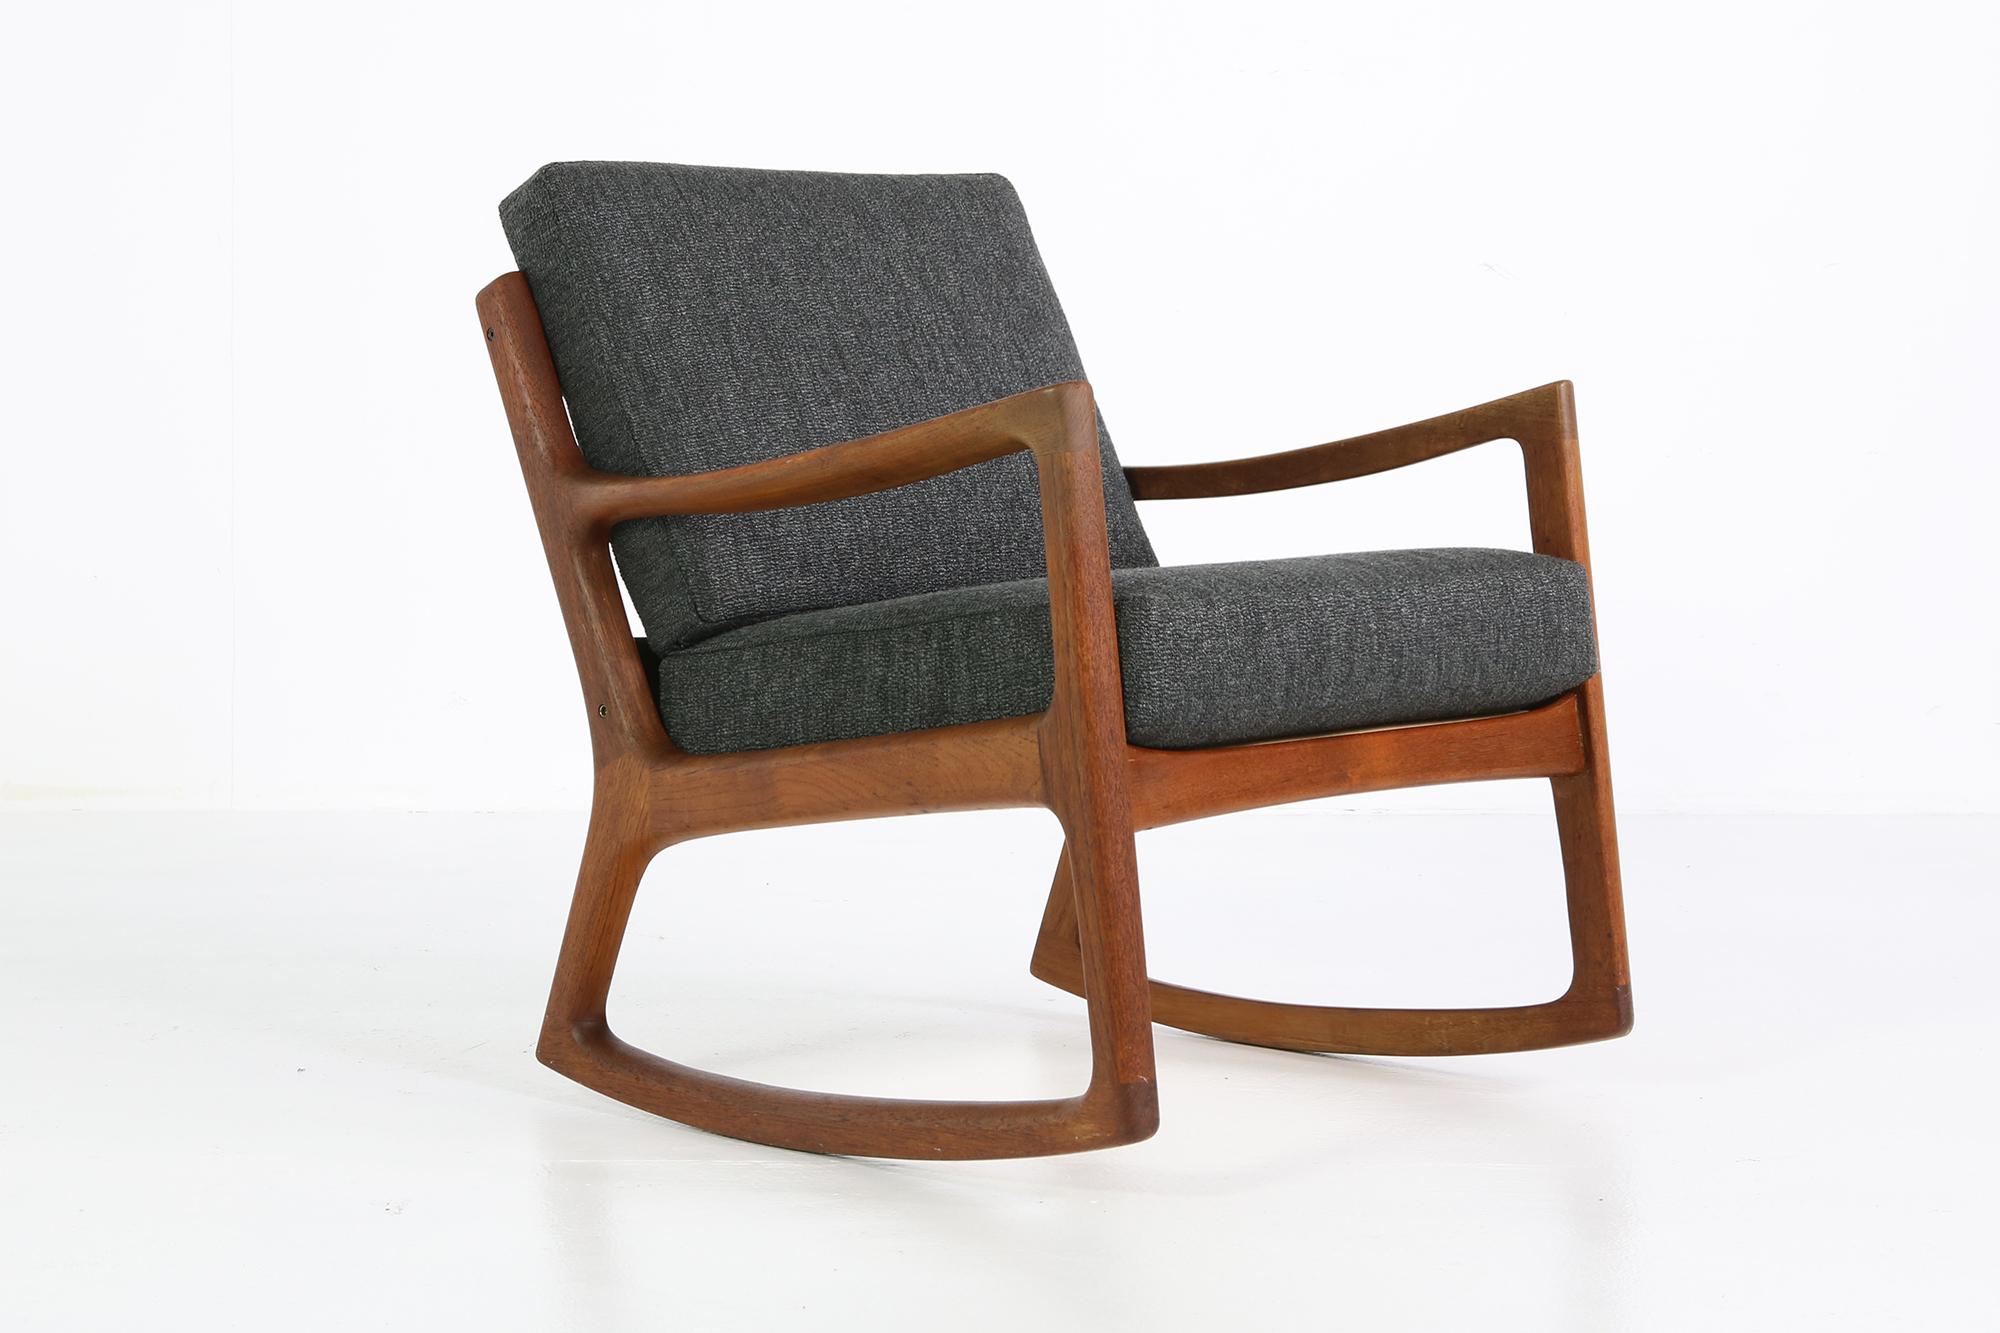 Beautiful midcentury danish modern Rocking Chair, produced by France and Son, designed by Ole Wanscher, made in Denmark. Solid teak wood, includes maker's stamp and badge. The cushions reupholstered and newly covered with woven fabric. Great vintage